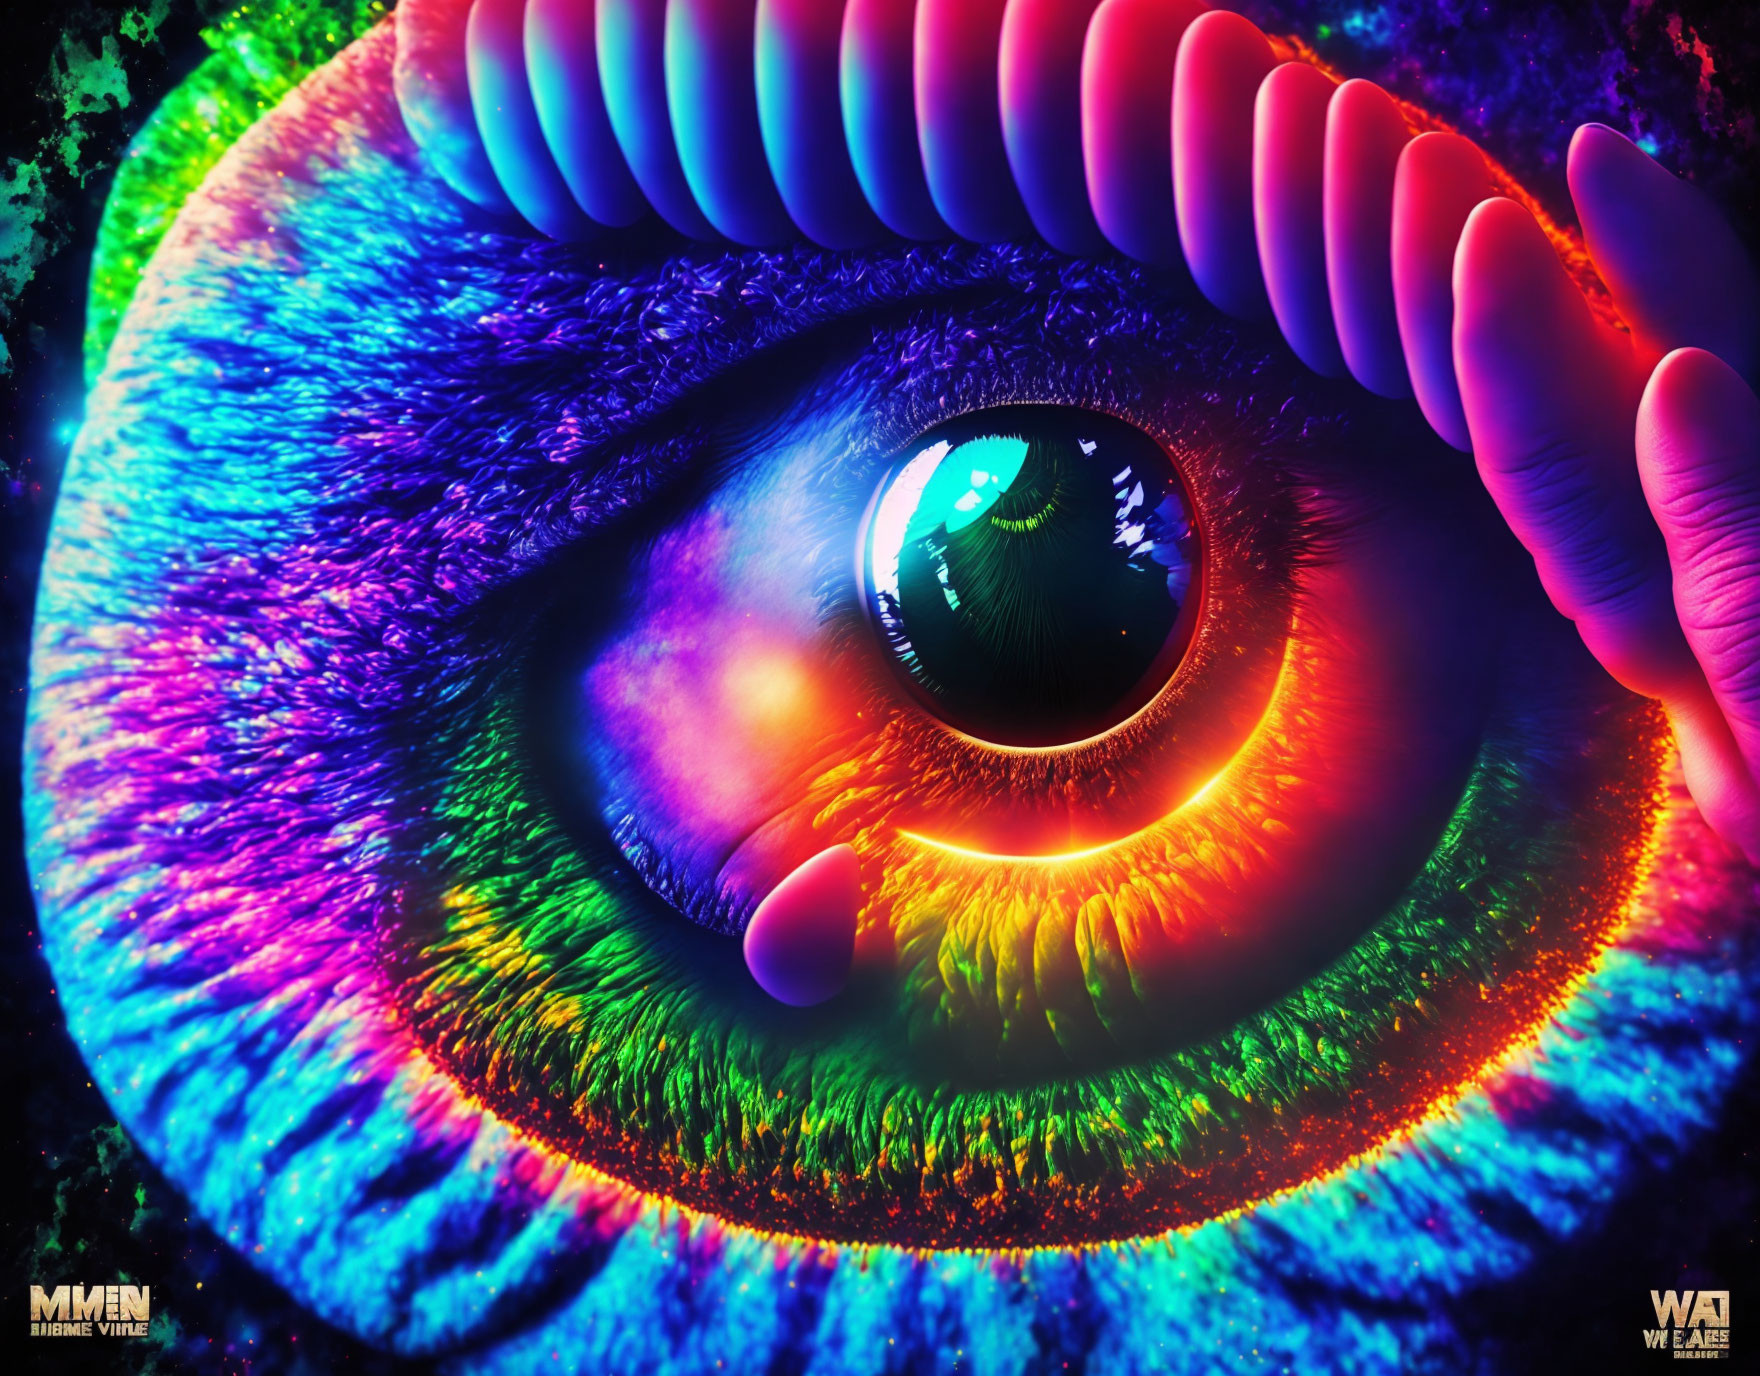 Detailed Close-Up of Vibrant Human Eye with Neon Illumination